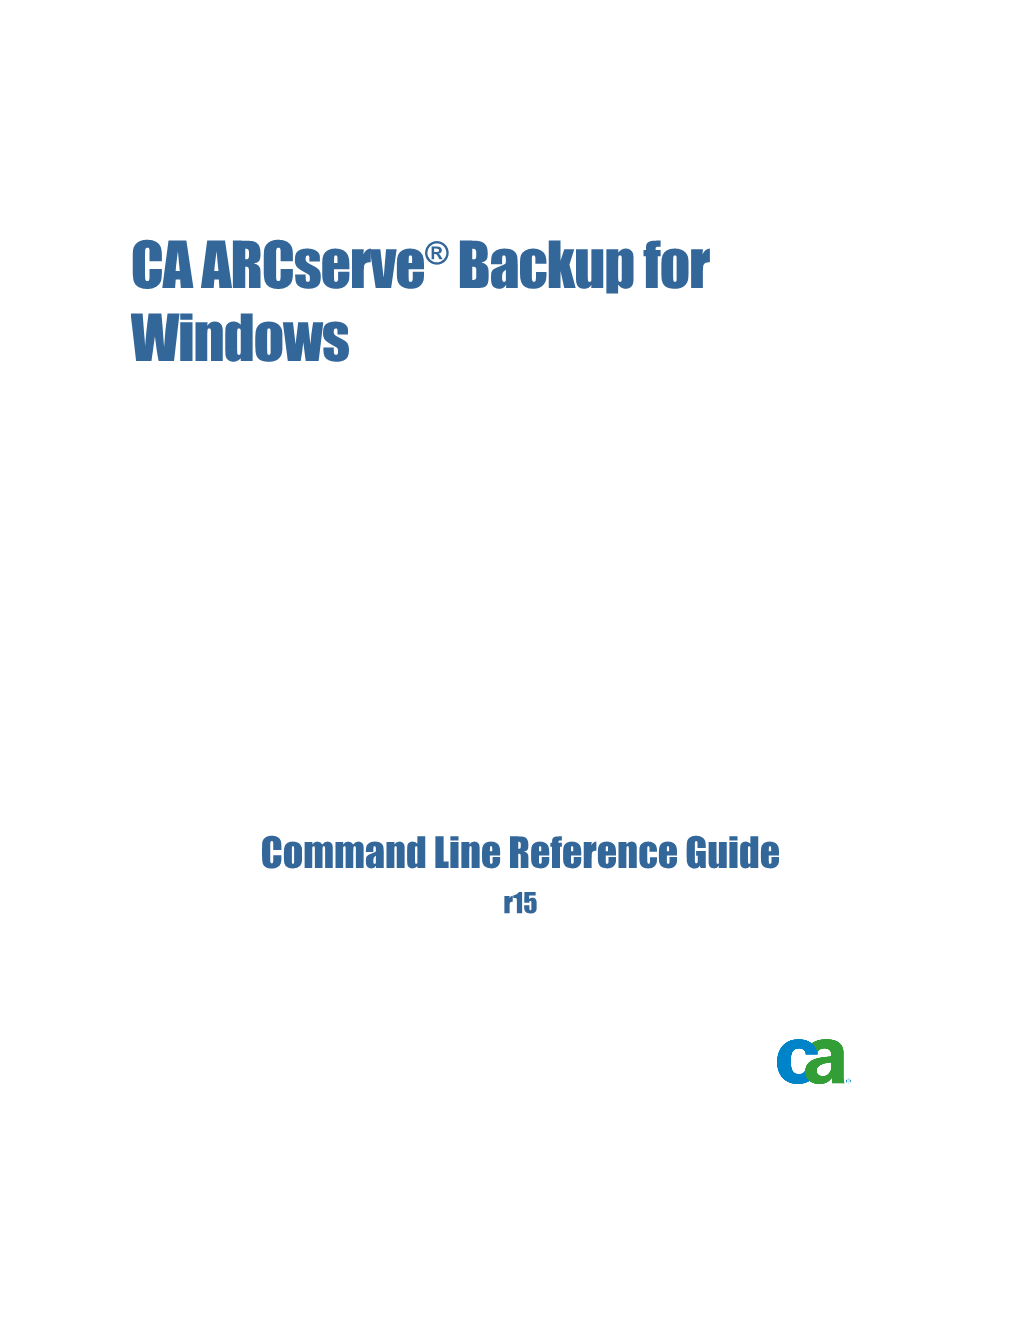 CA Arcserve Backup for Windows Command Line Reference Guide